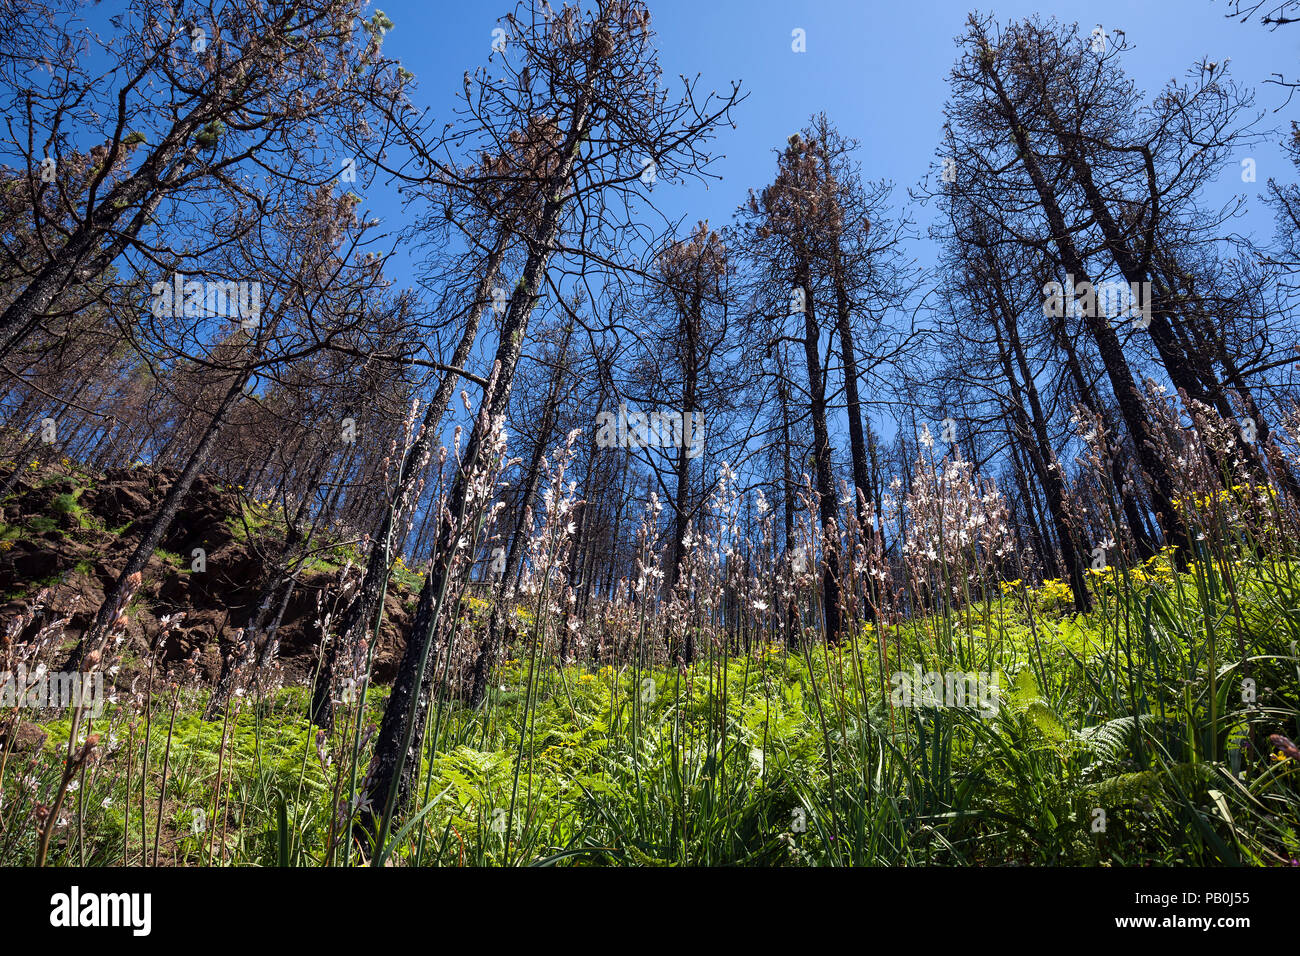 Canary pines burnt by forest fire stand in green and blooming ground vegetation, Becerram Hiking trail at Las Lagunetas Stock Photo